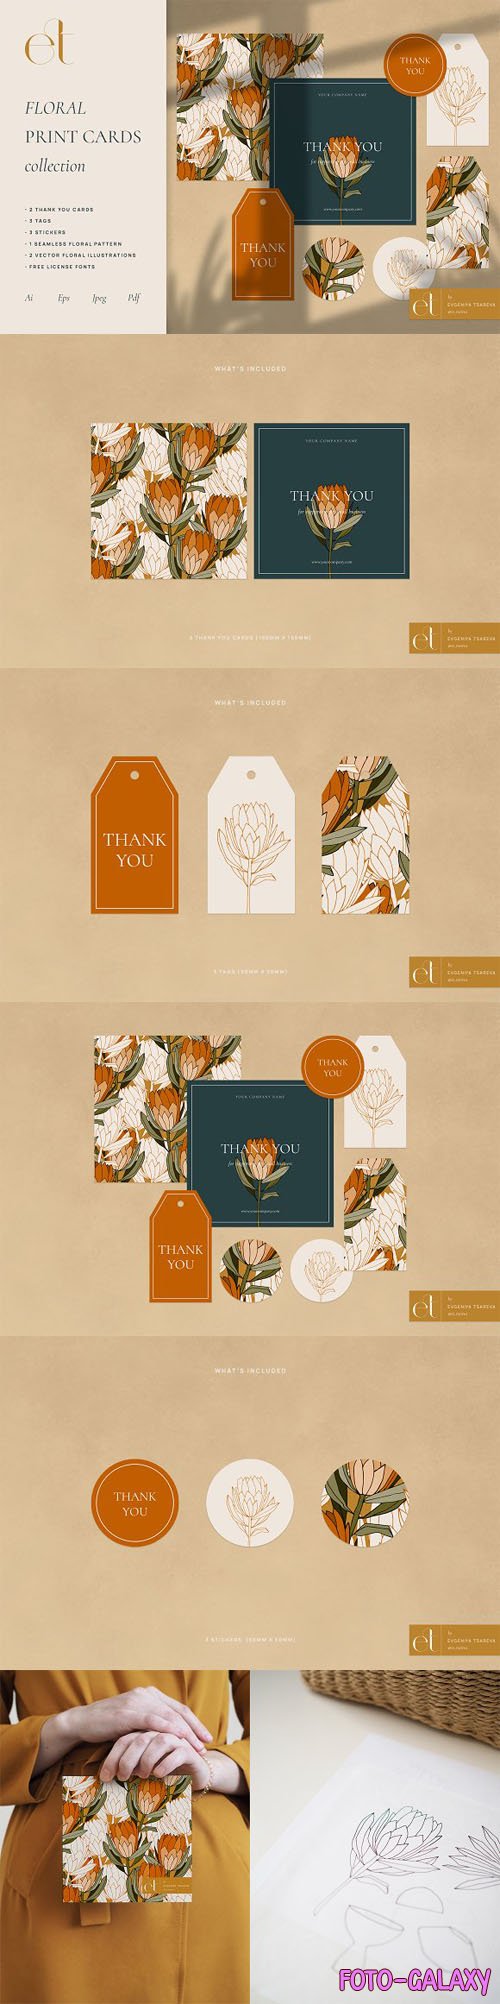 Floral Print Cards Vector Collection